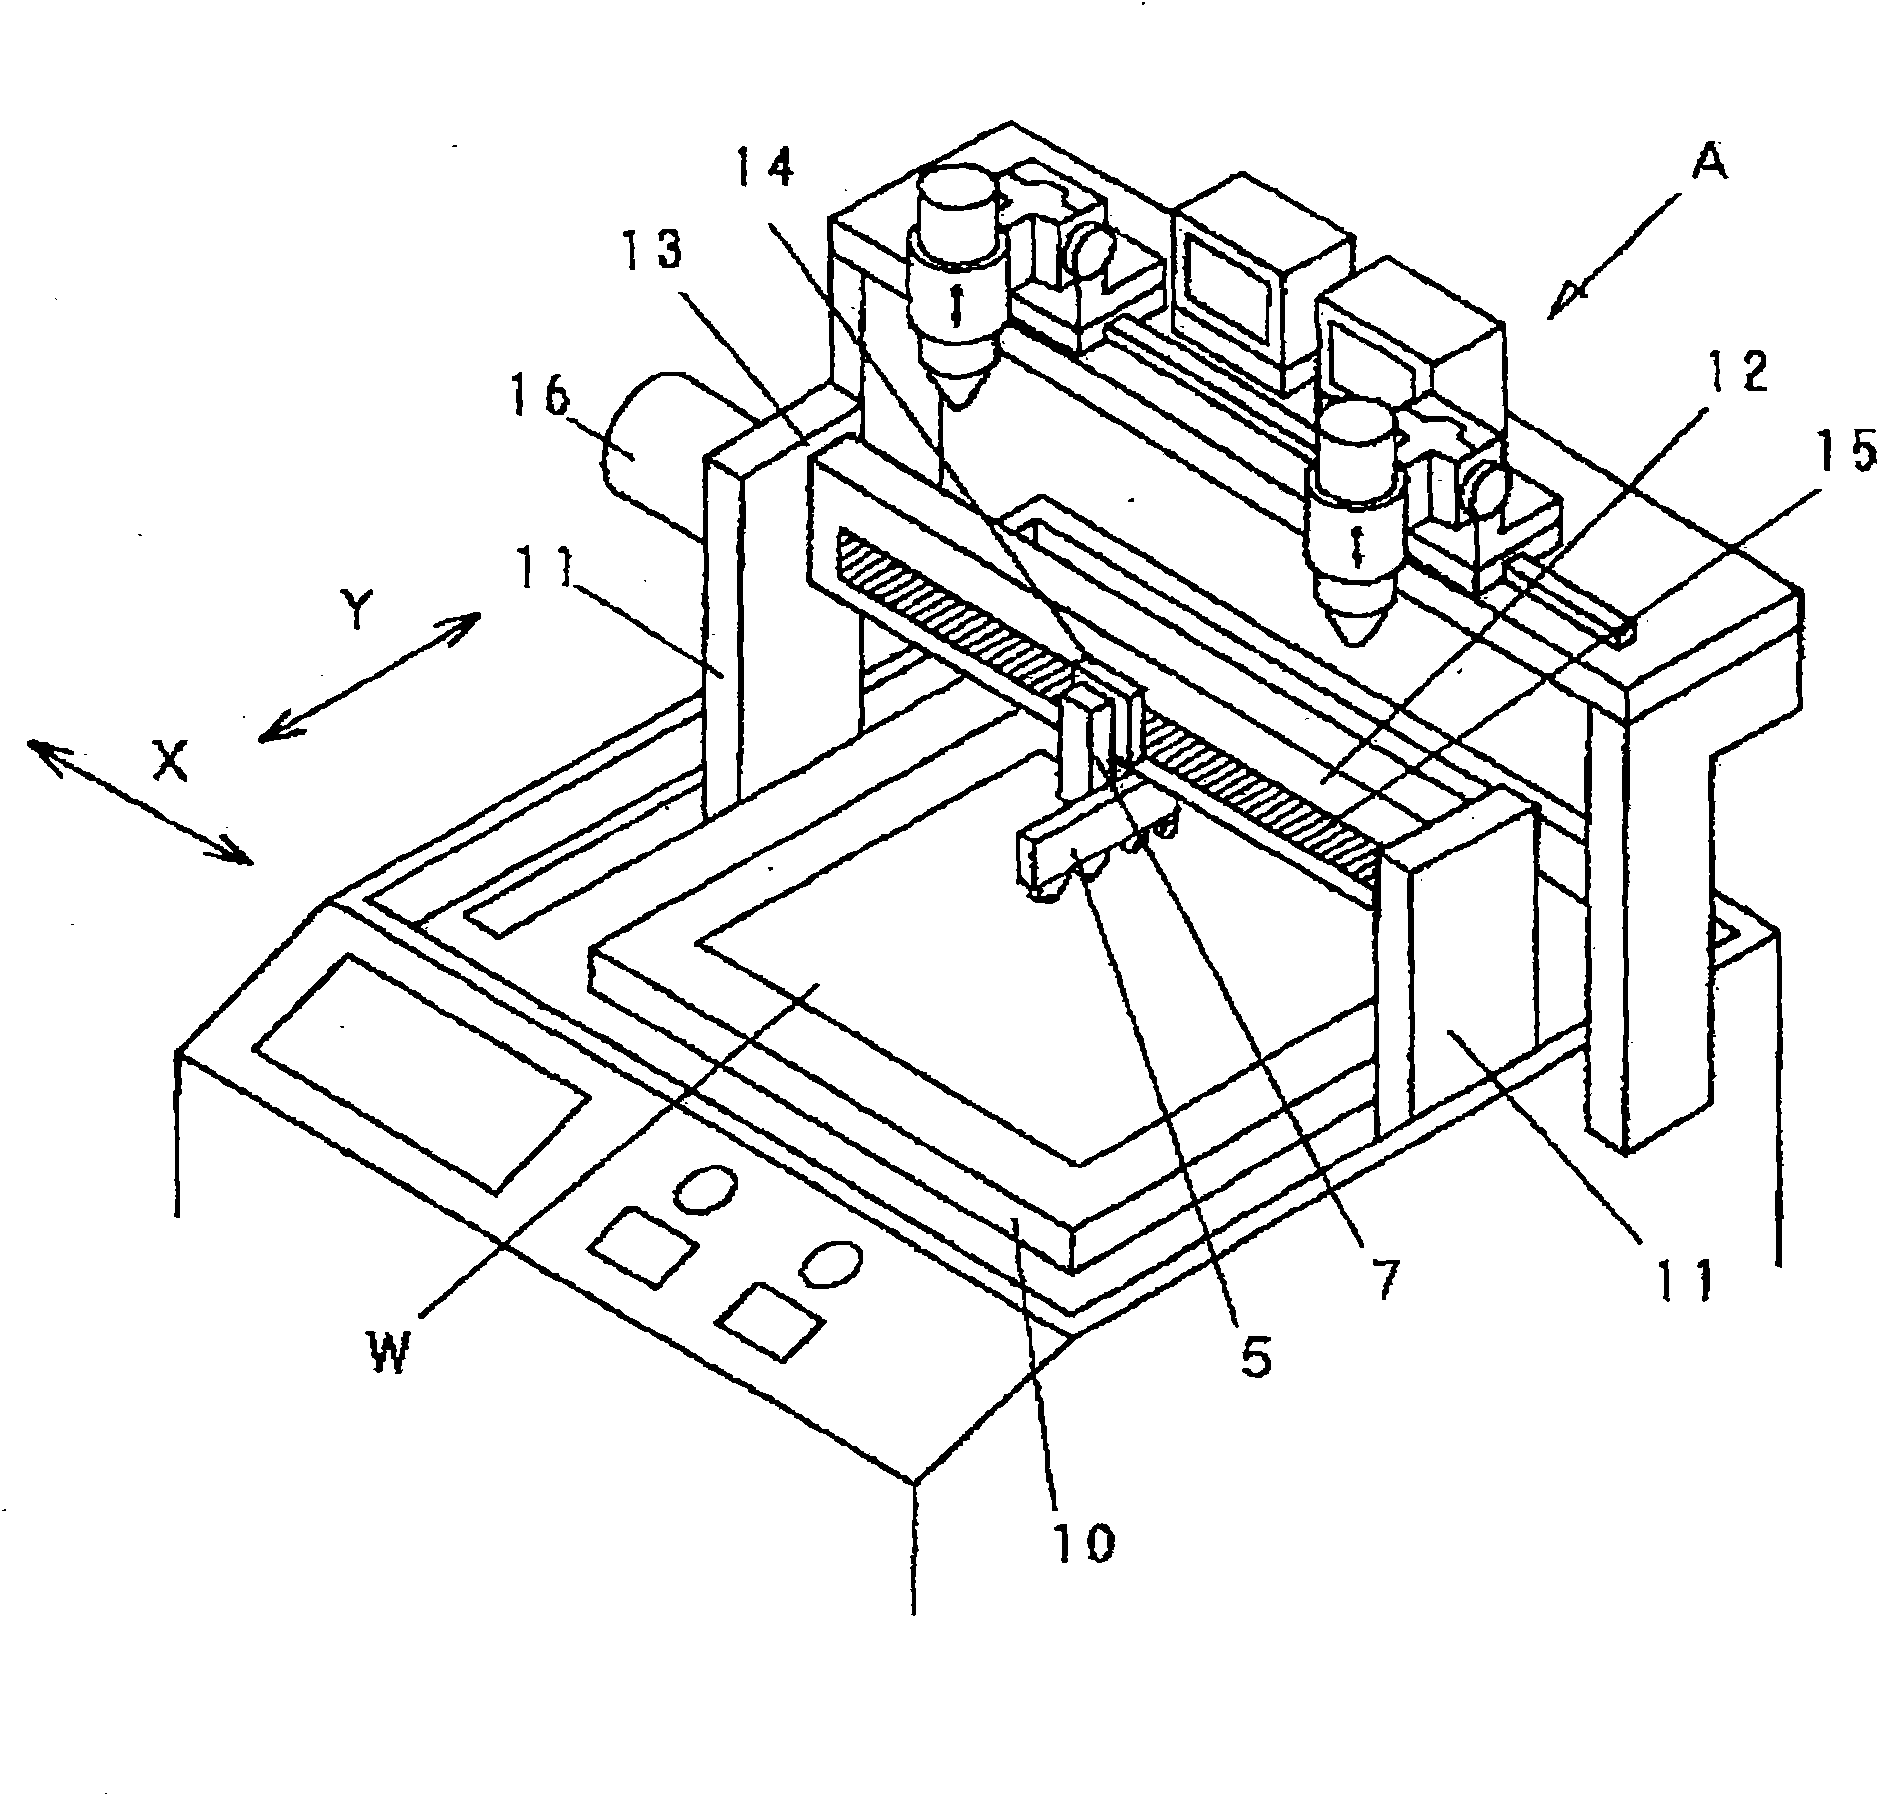 Method and apparatus for processing brittle material substrate